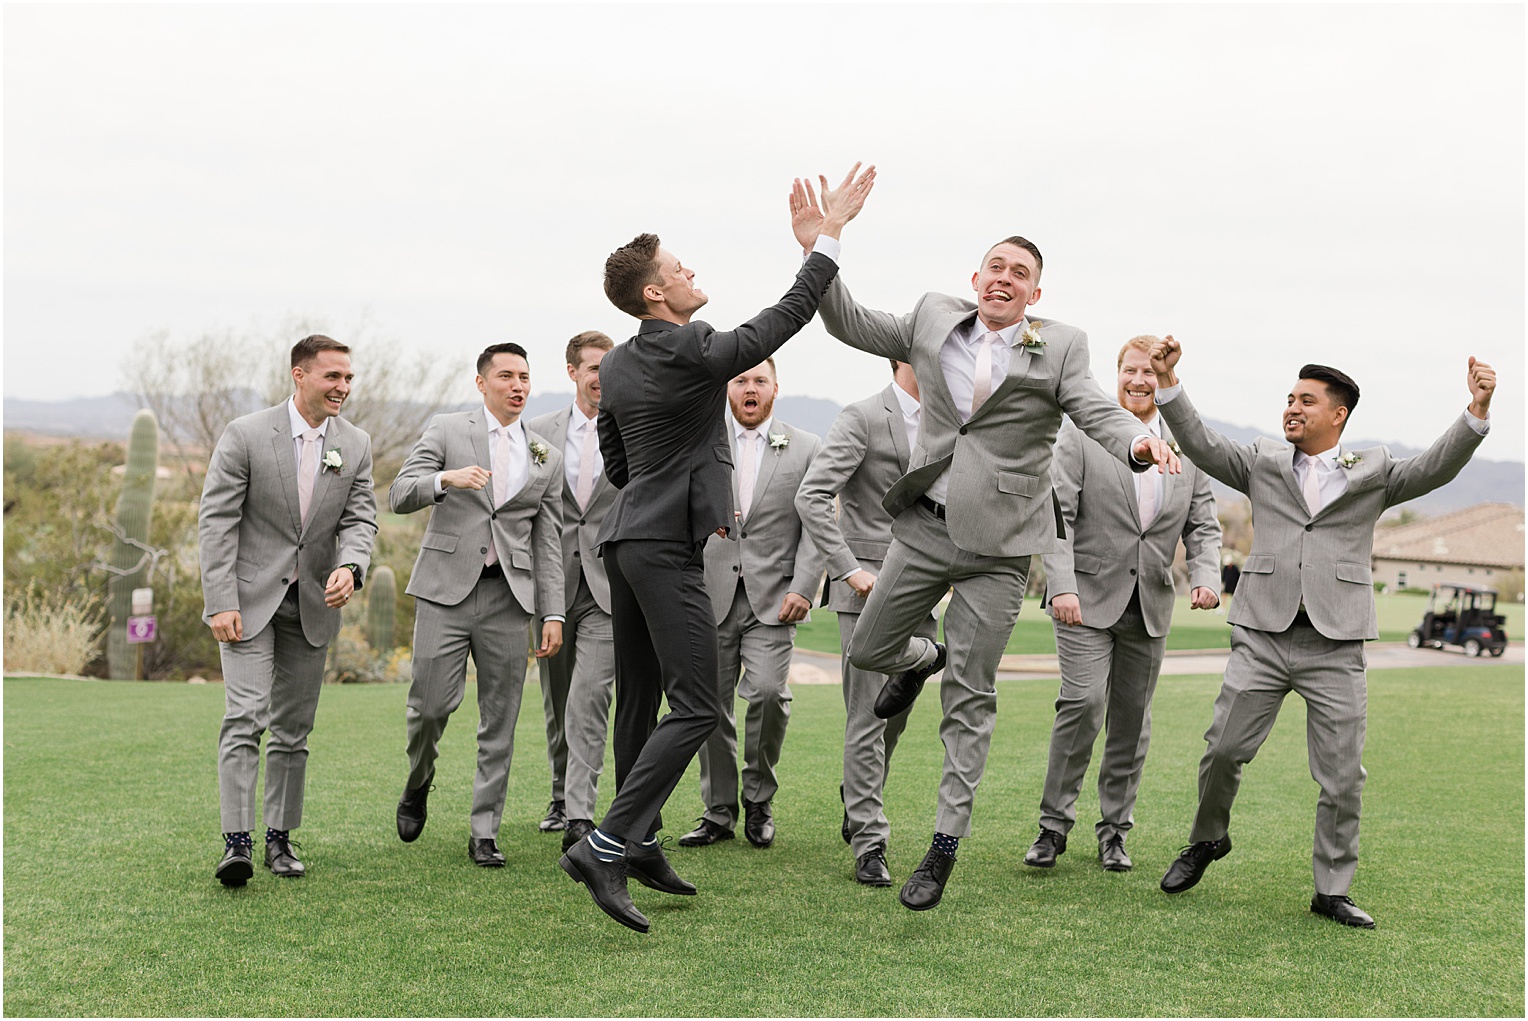 Highlands at Dove Mountain Wedding Grace + Danny fun groomsmen pose in grey and charcoal tuxes